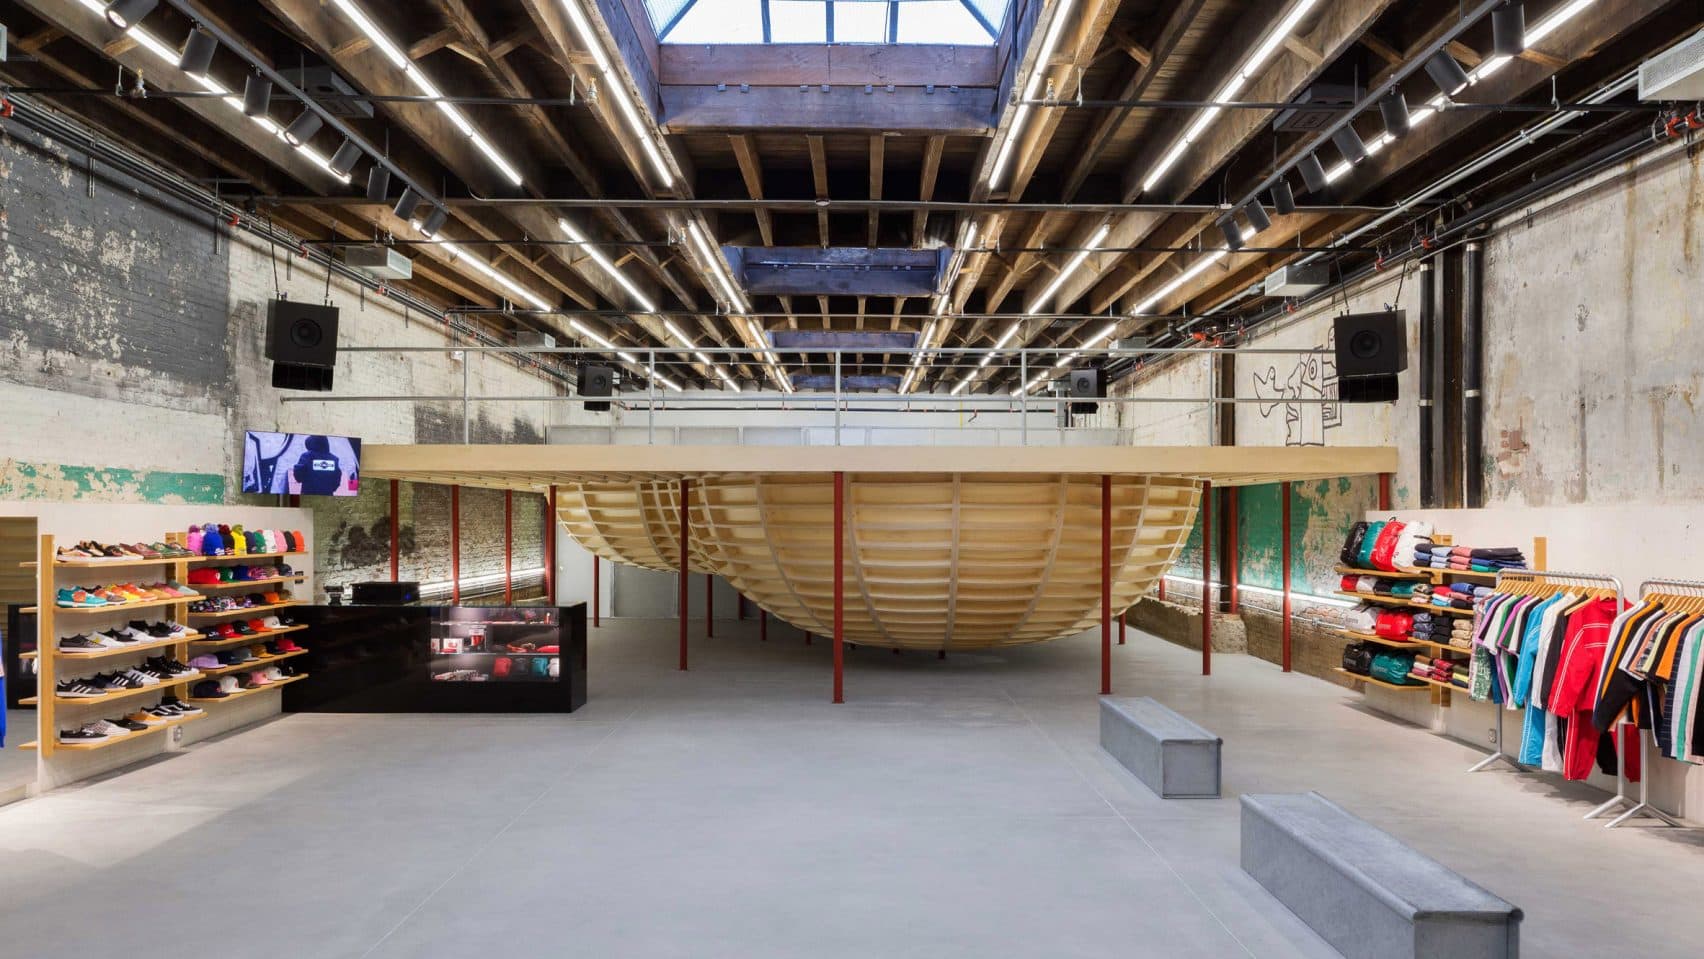 Supreme store in Williamsburg, Brooklyn by architect Neil Logan, featuring an elevated skate bowl